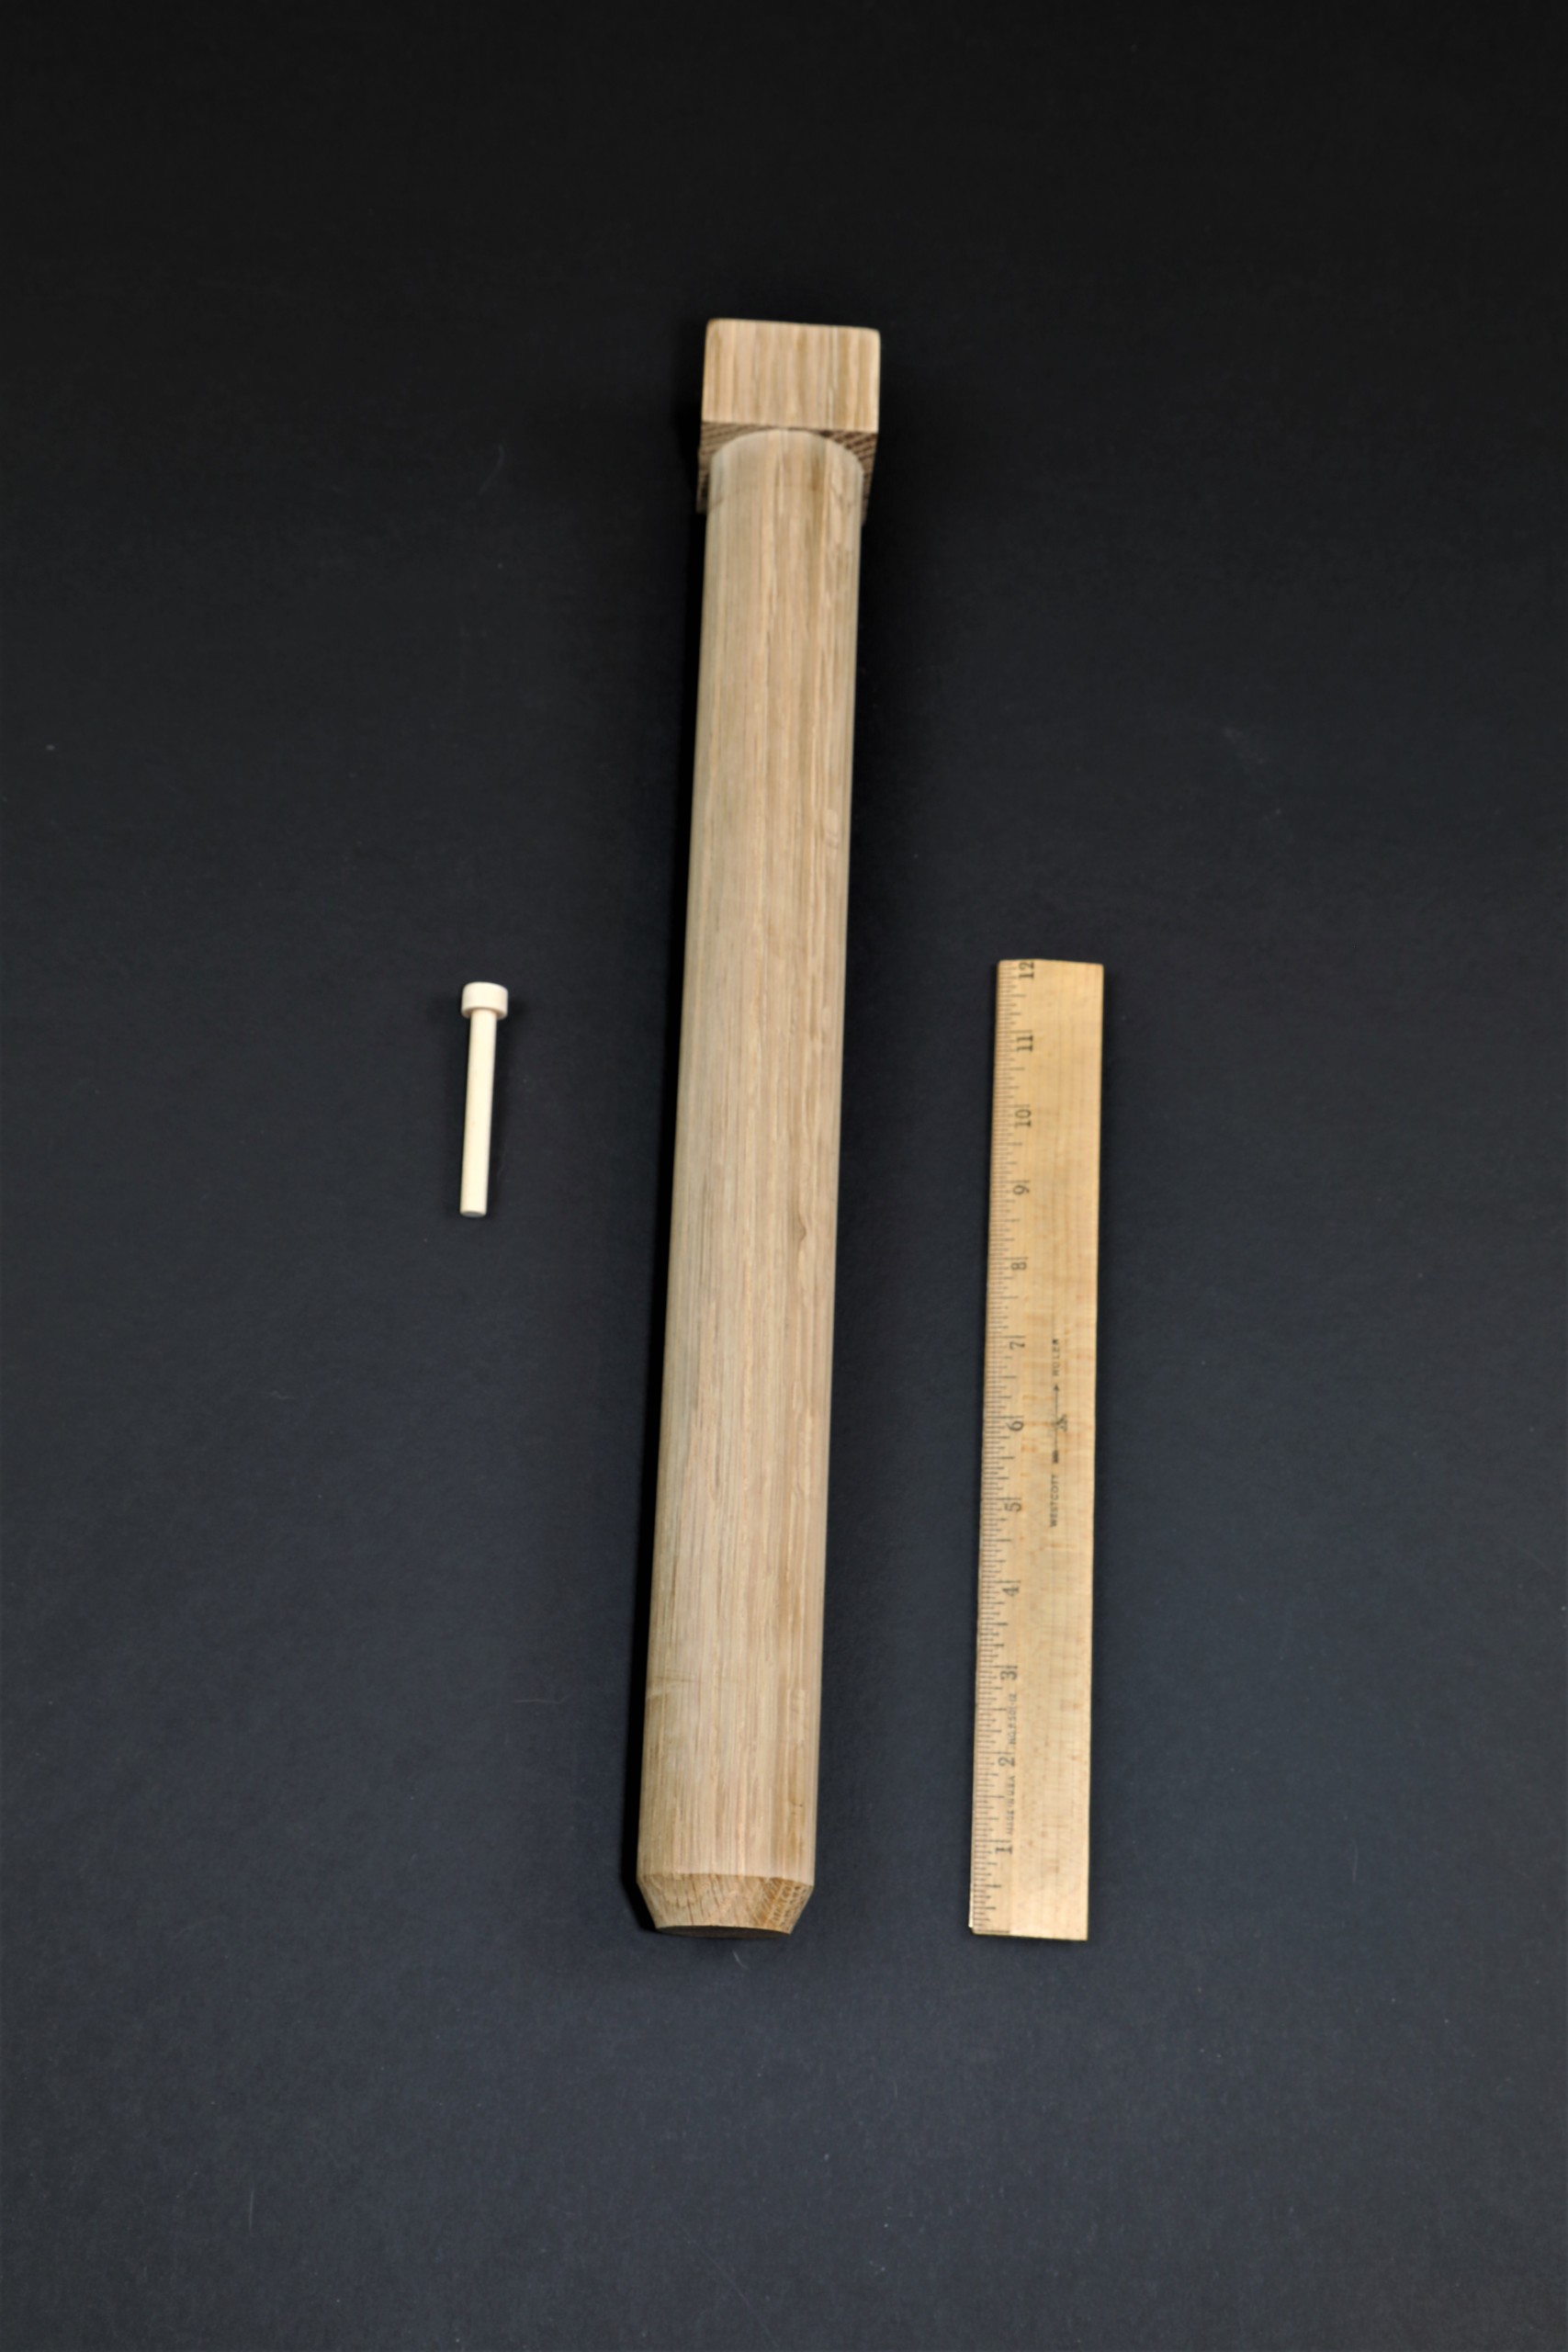 three Wooden Pegs in different sizes